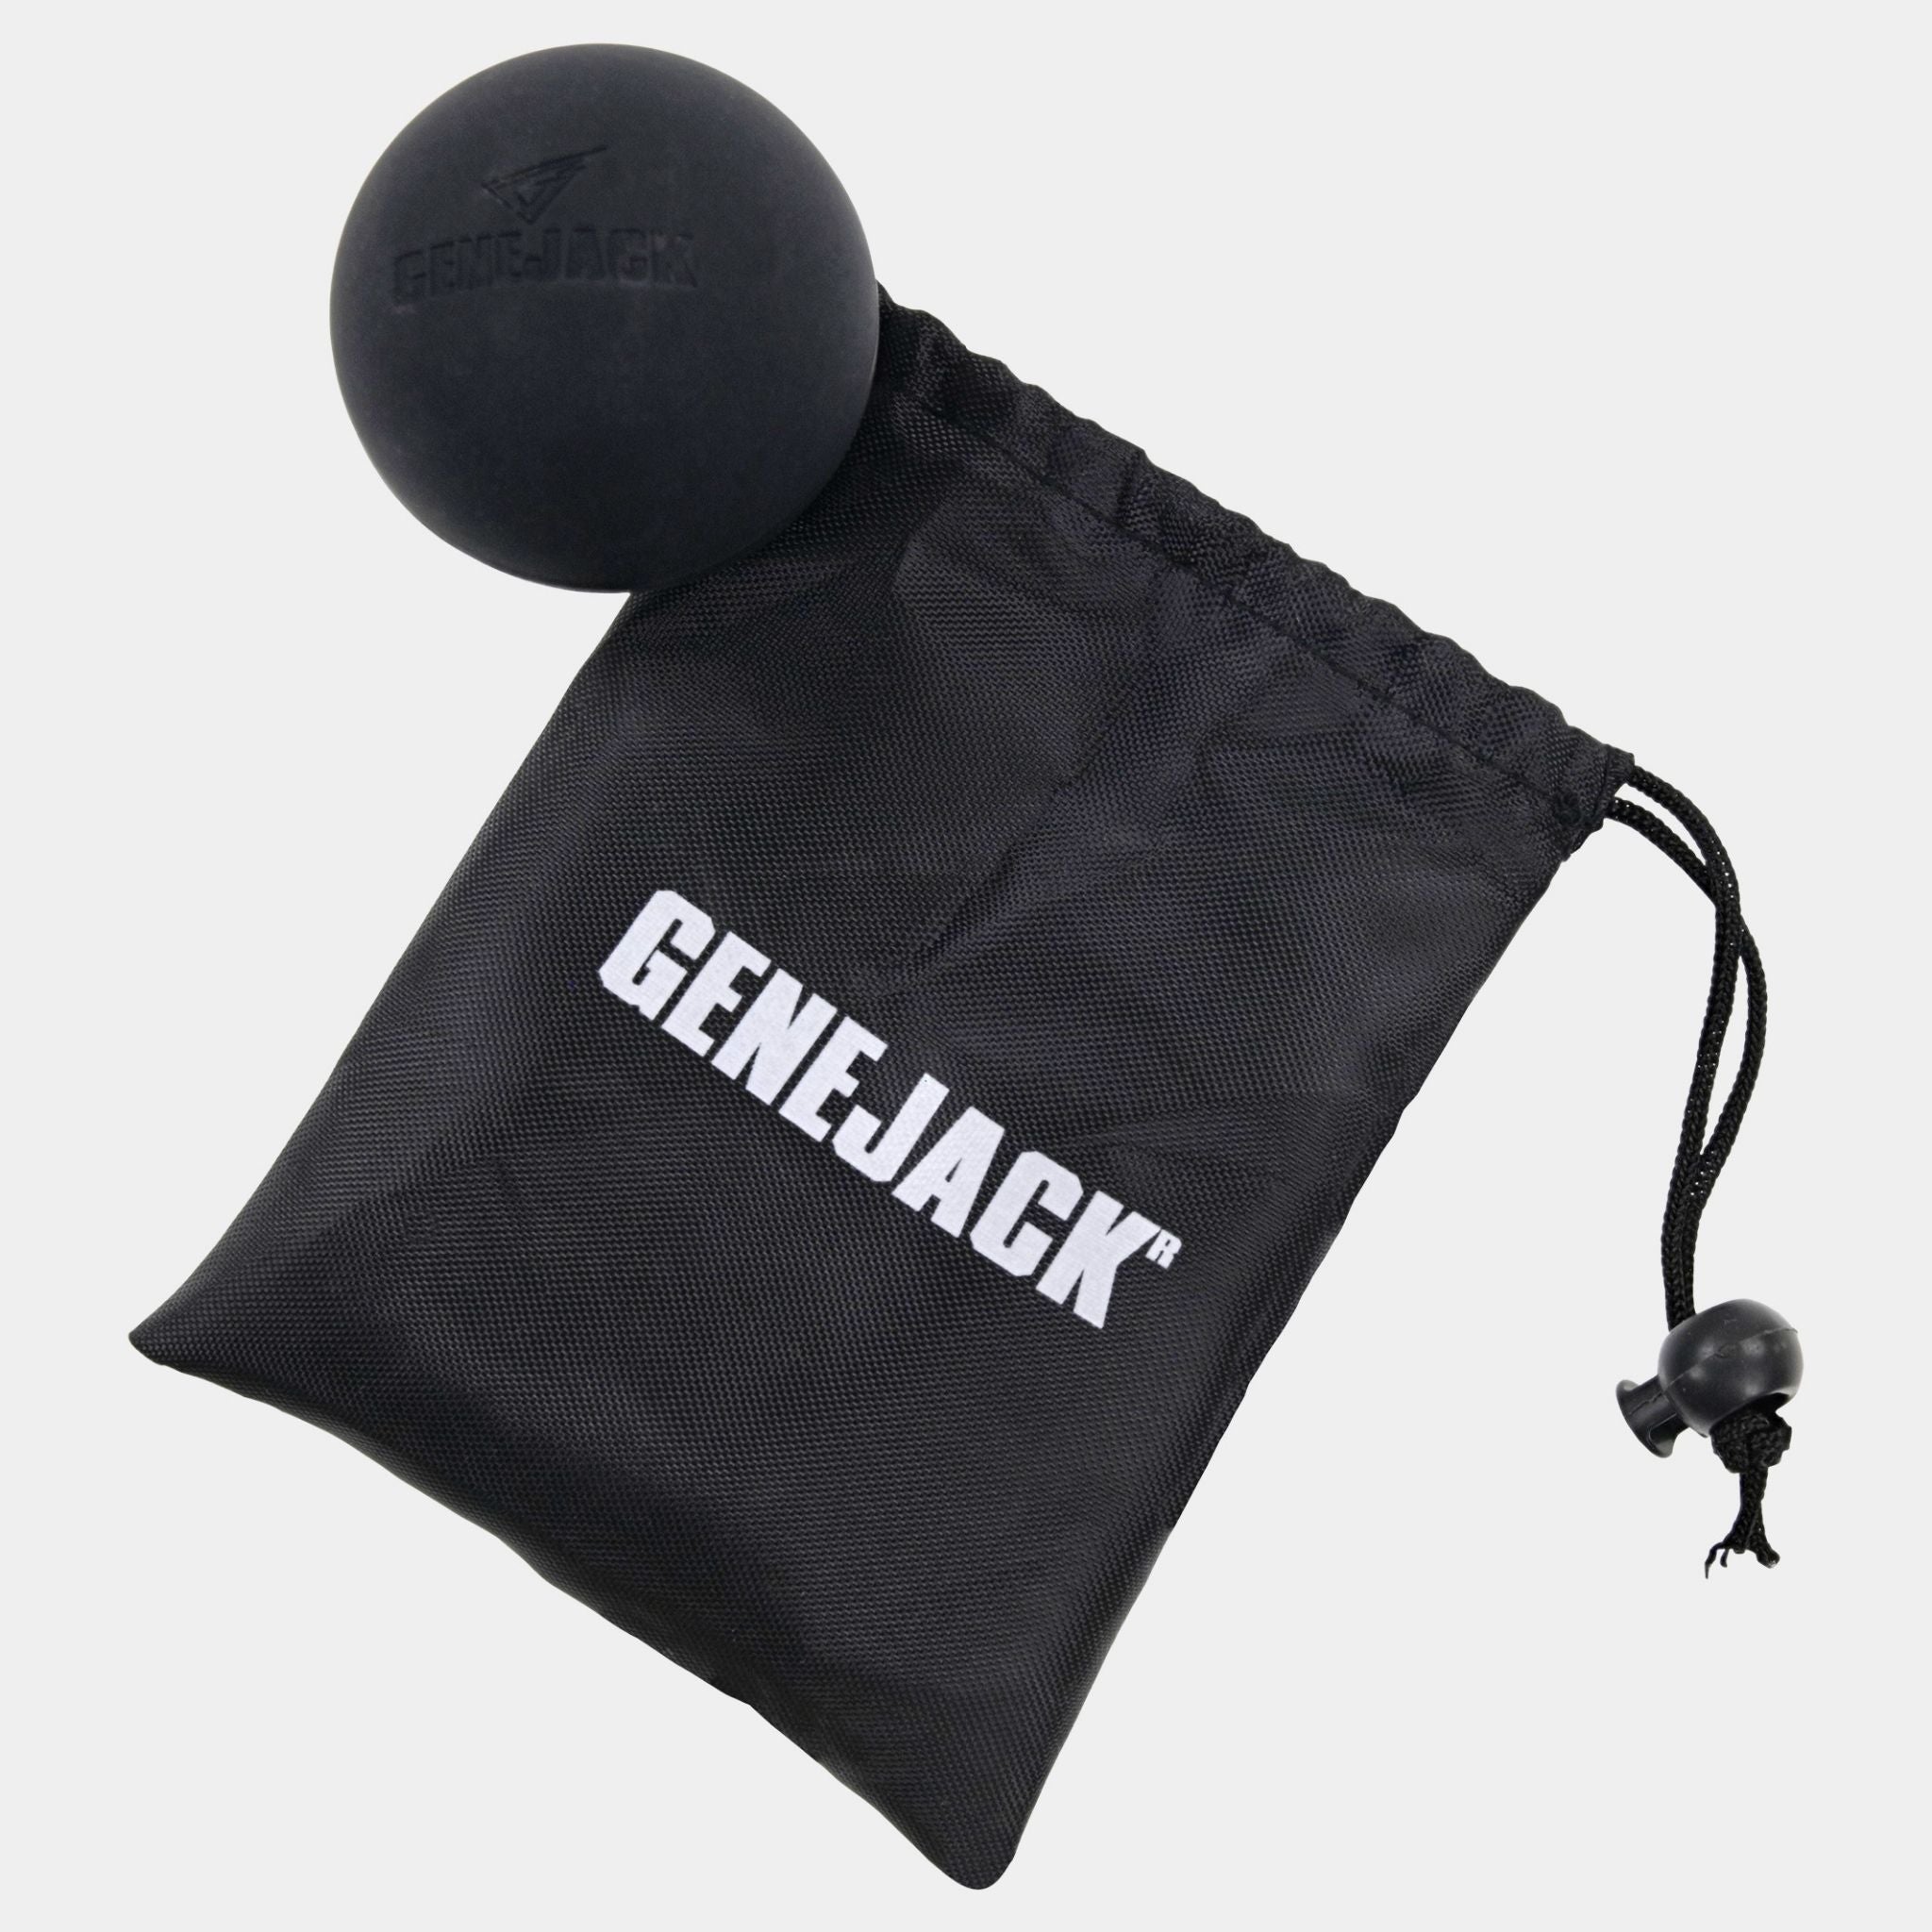 Massage Therapy Ball from Genejack for Genejack WOD